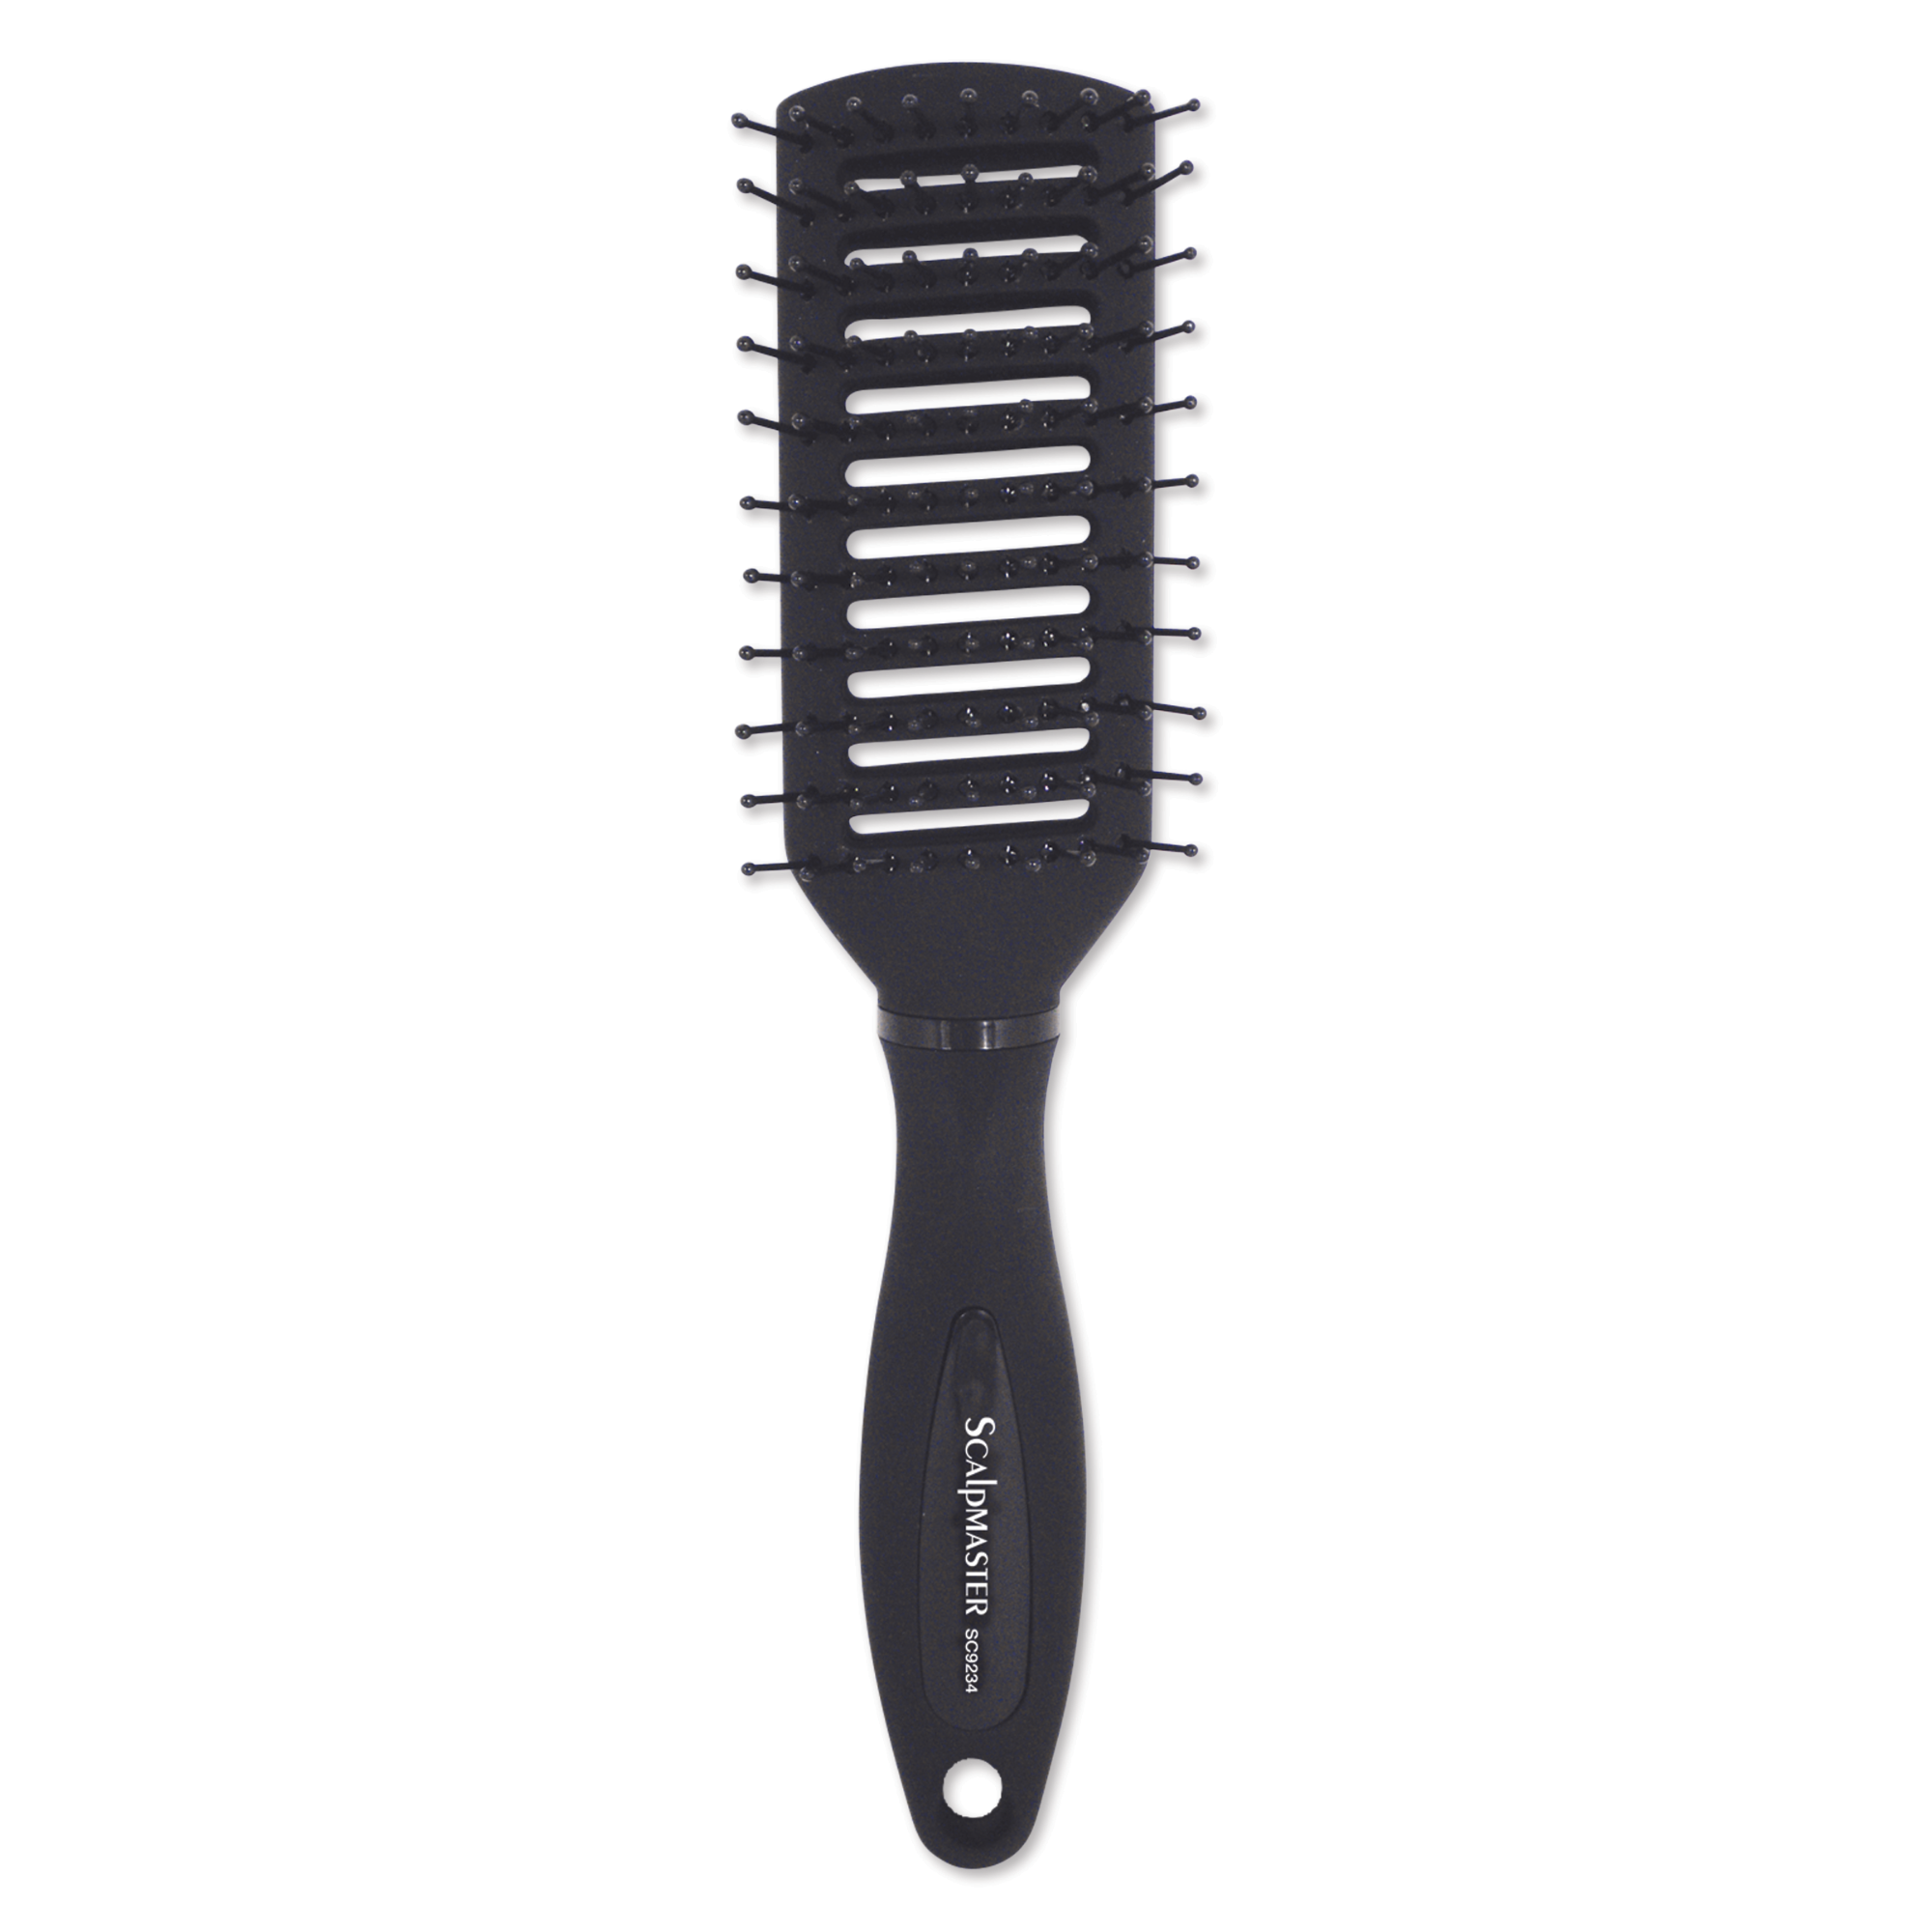 Tunnel Vent Brush with Rubberized Handle, 9 Row